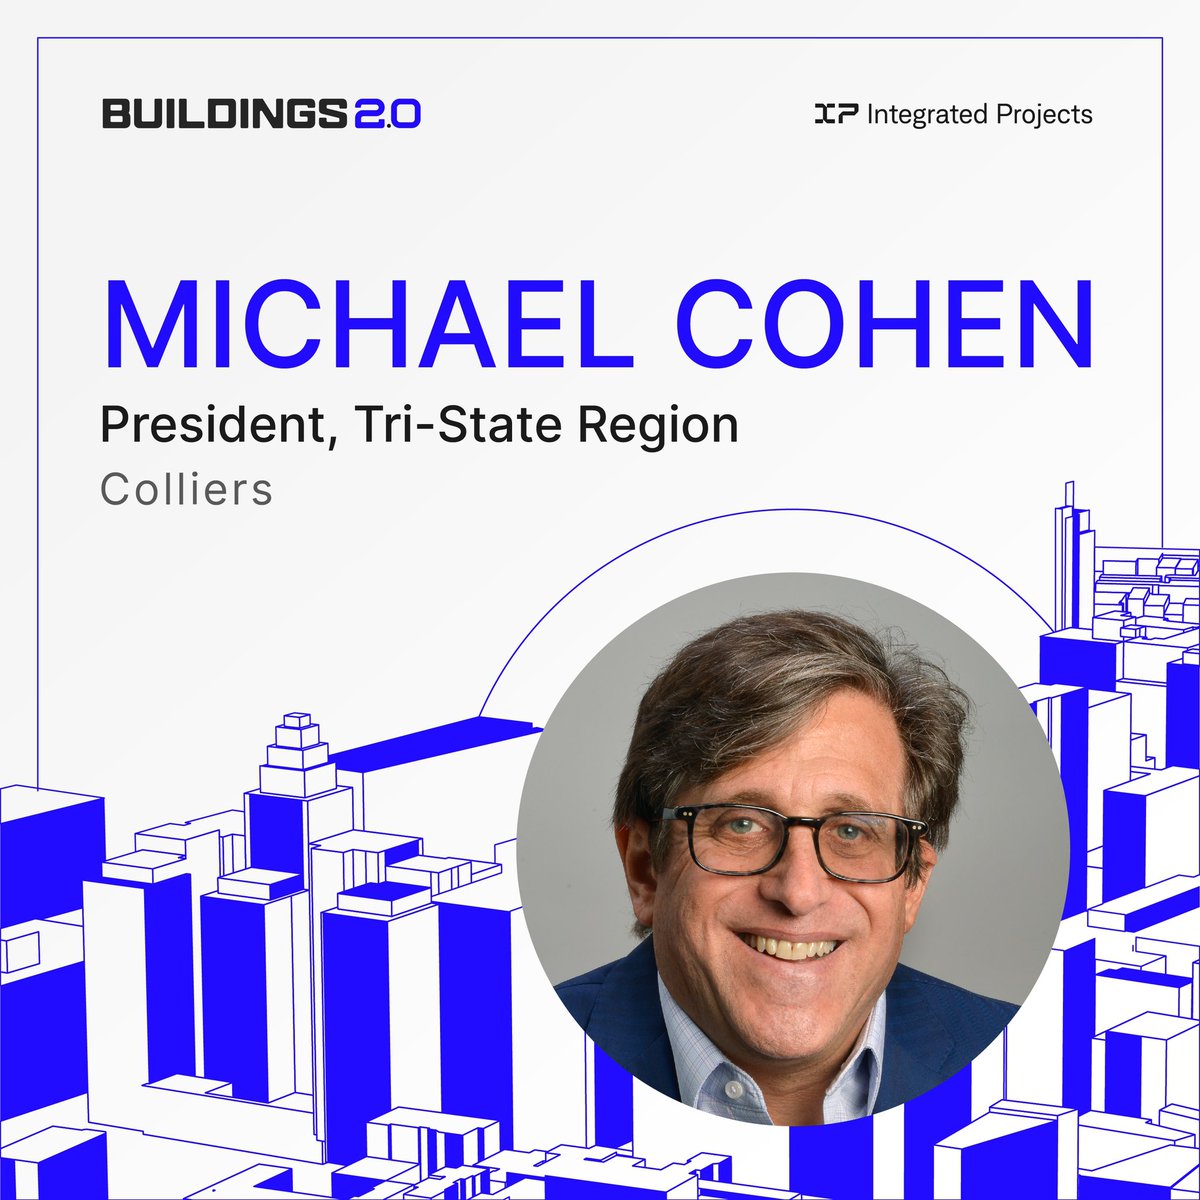 Michael Cohen, Board Chair of Flatiron NoMad Partnership and Tri-State President at Colliers joined Jose Cruz Jr. on the Buildings 2.0 podcast. Listen to the full episode here: podcasts.apple.com/us/podcast/col…